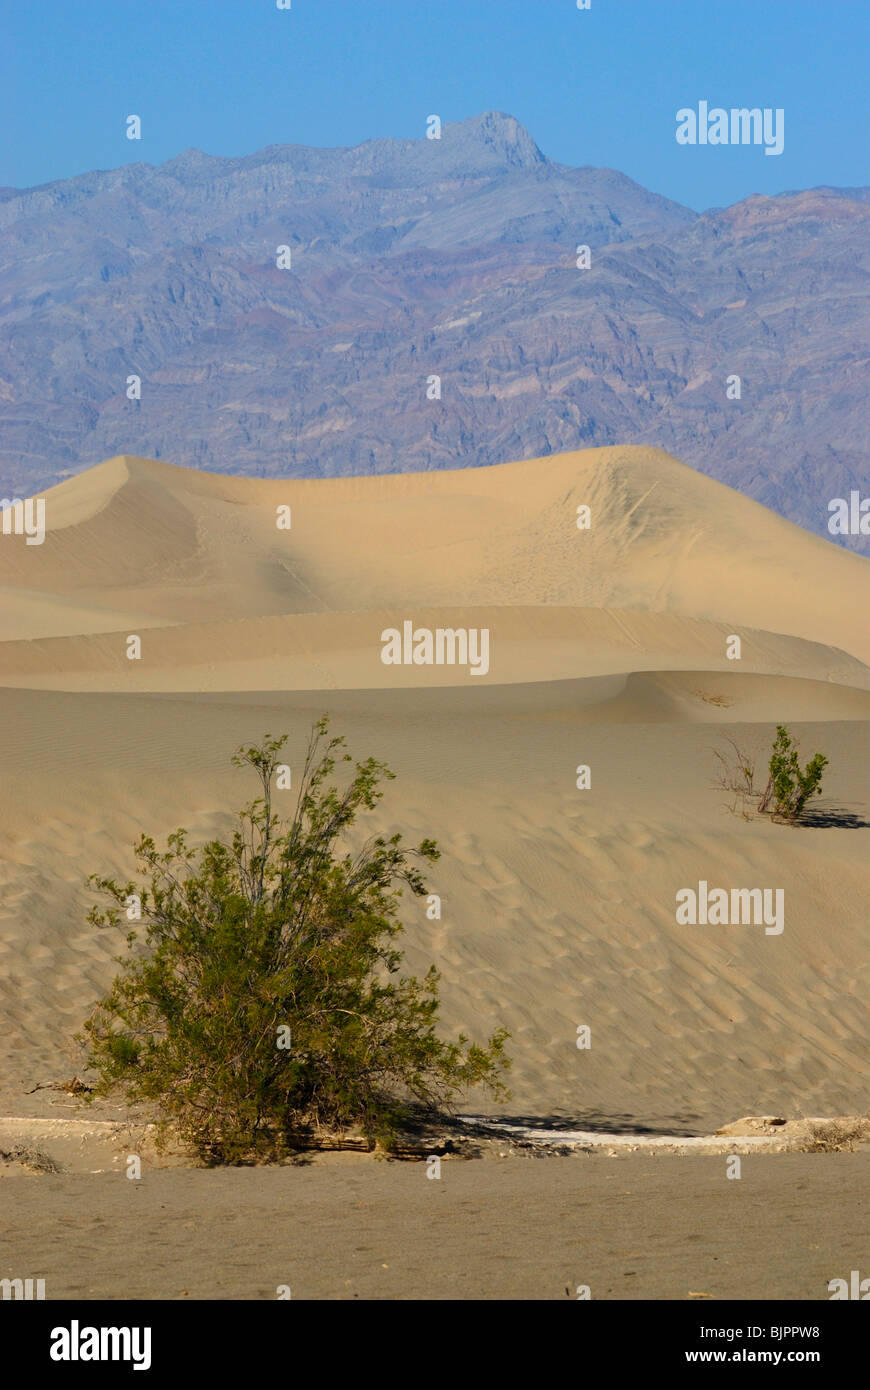 Small green trees in Sand Dunes in Death Valley, California state Stock Photo